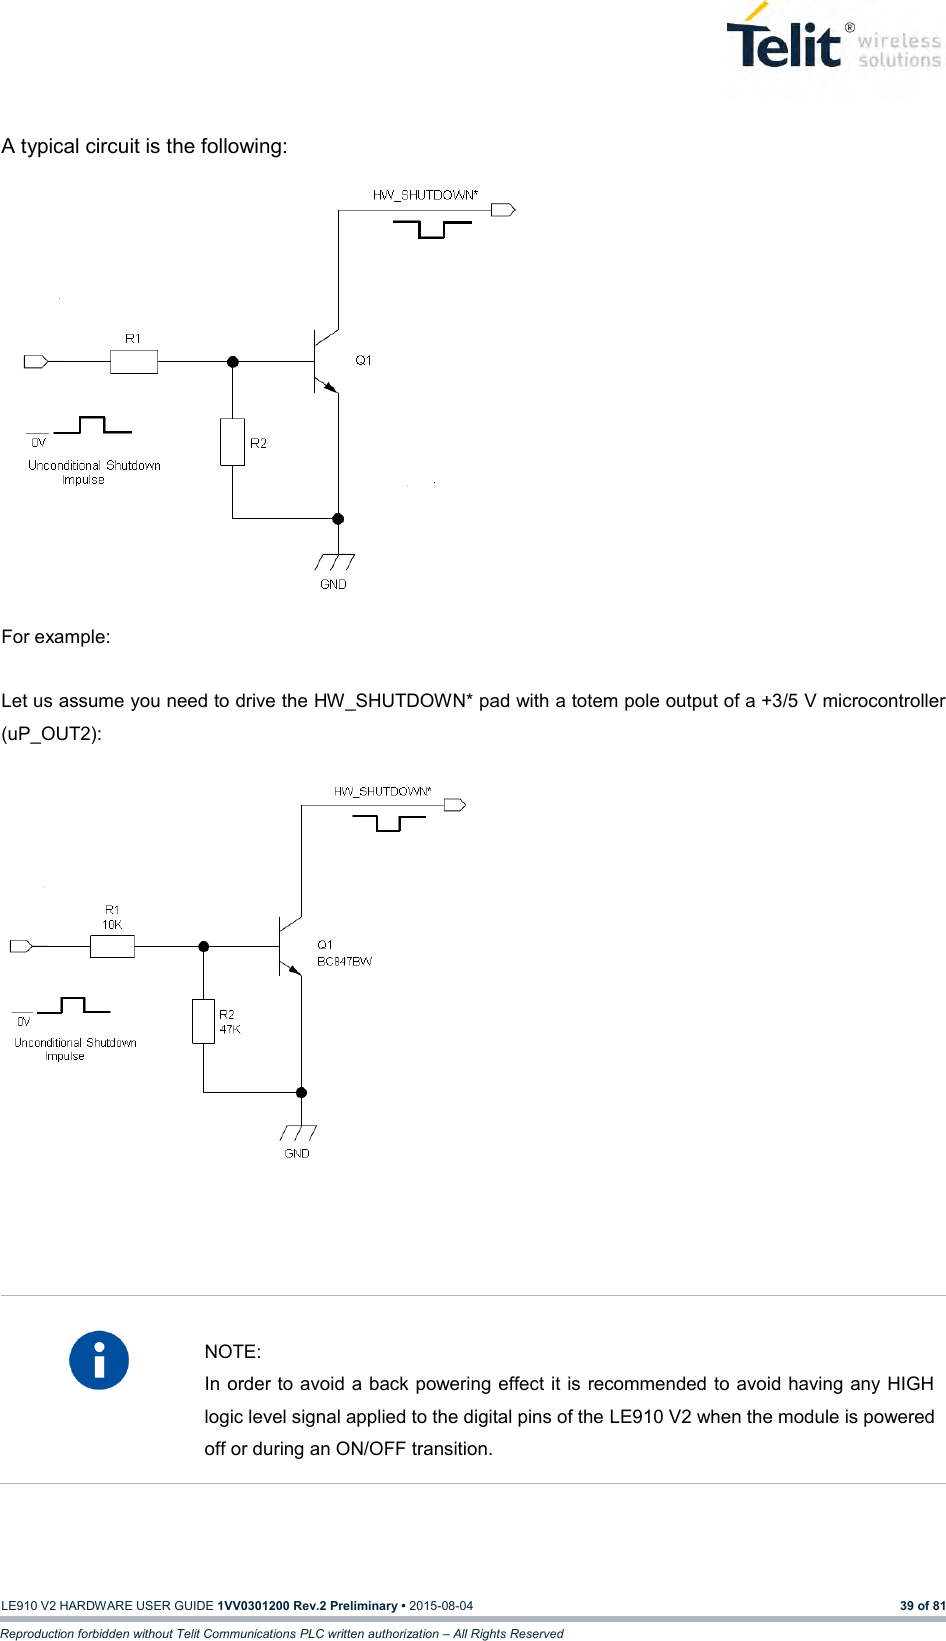   LE910 V2 HARDWARE USER GUIDE 1VV0301200 Rev.2 Preliminary • 2015-08-04 39 of 81 Reproduction forbidden without Telit Communications PLC written authorization – All Rights Reserved  A typical circuit is the following:                        For example:  Let us assume you need to drive the HW_SHUTDOWN* pad with a totem pole output of a +3/5 V microcontroller (uP_OUT2):                     NOTE: In order to avoid a back powering effect it is recommended to avoid having any HIGH logic level signal applied to the digital pins of the LE910 V2 when the module is powered off or during an ON/OFF transition.    